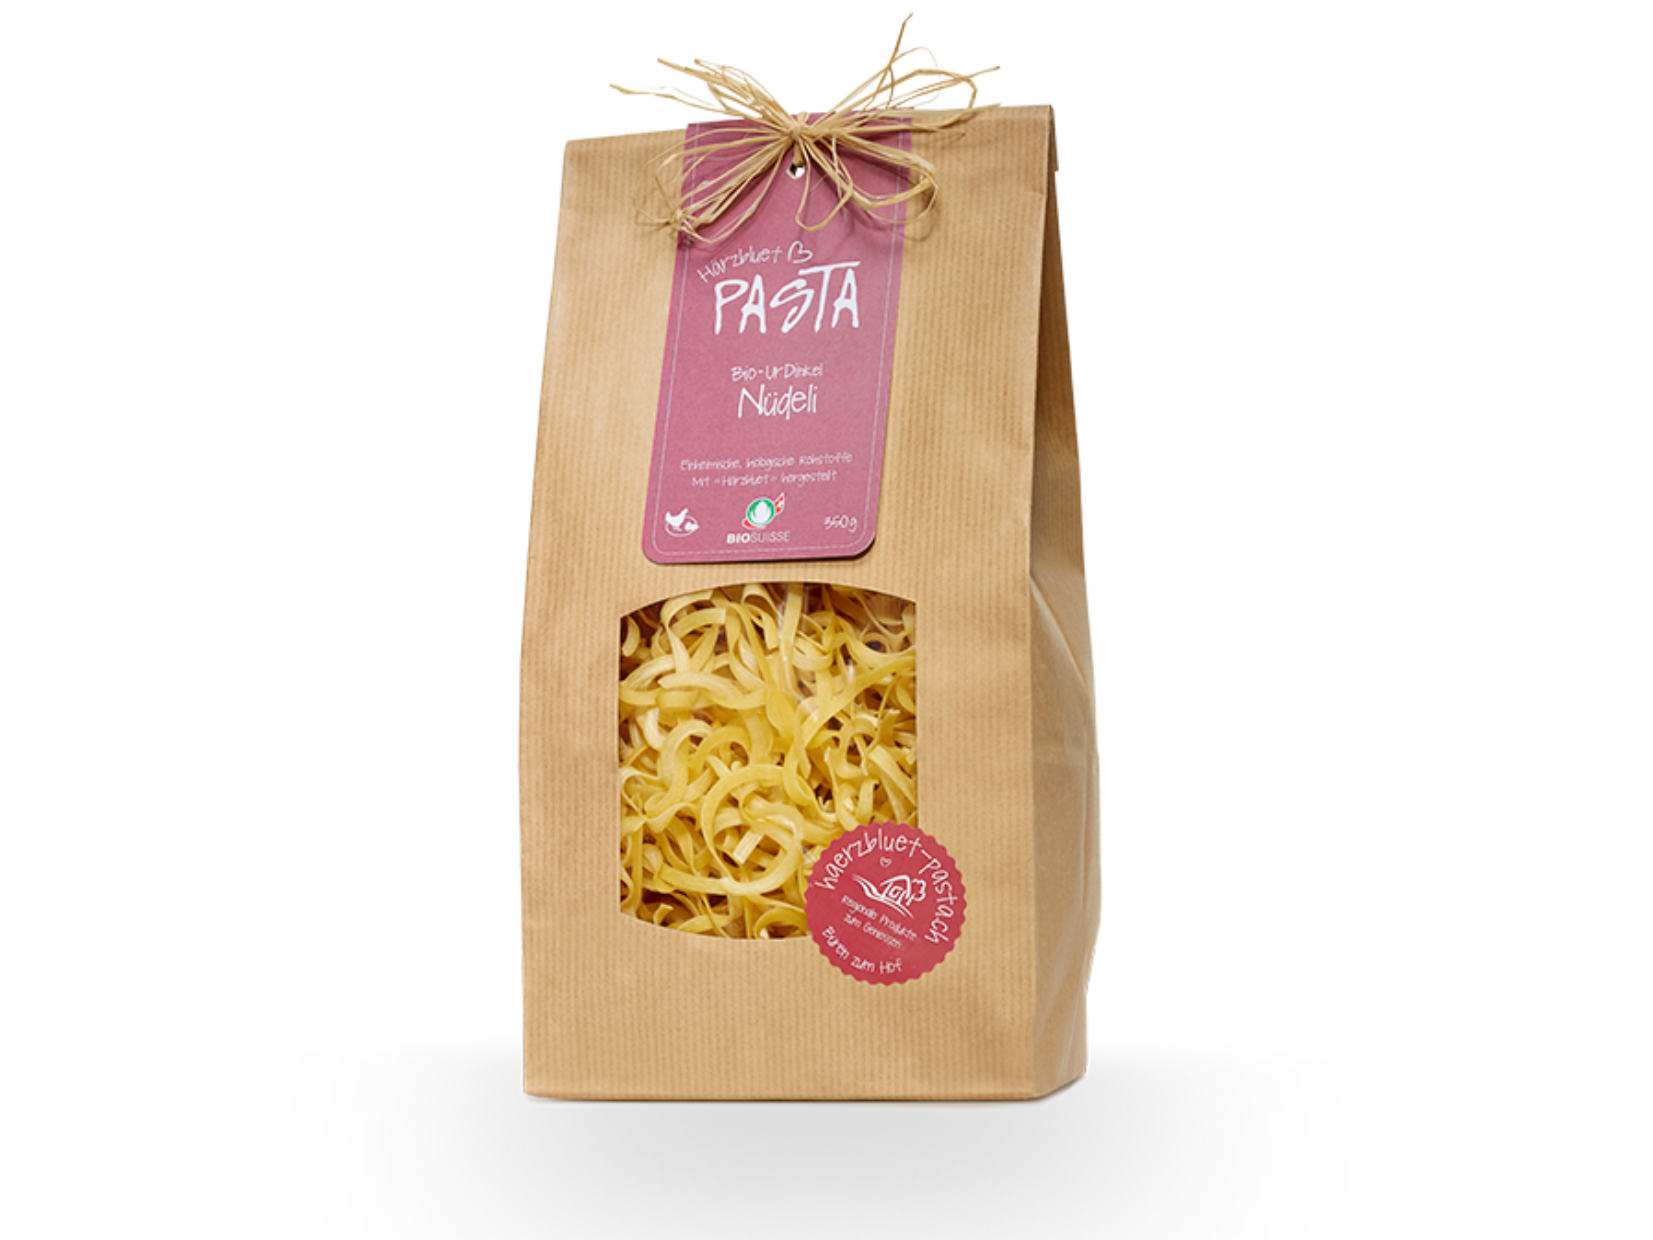 Organic spelt noodles (350g), artisanal product for direct sale in Switzerland